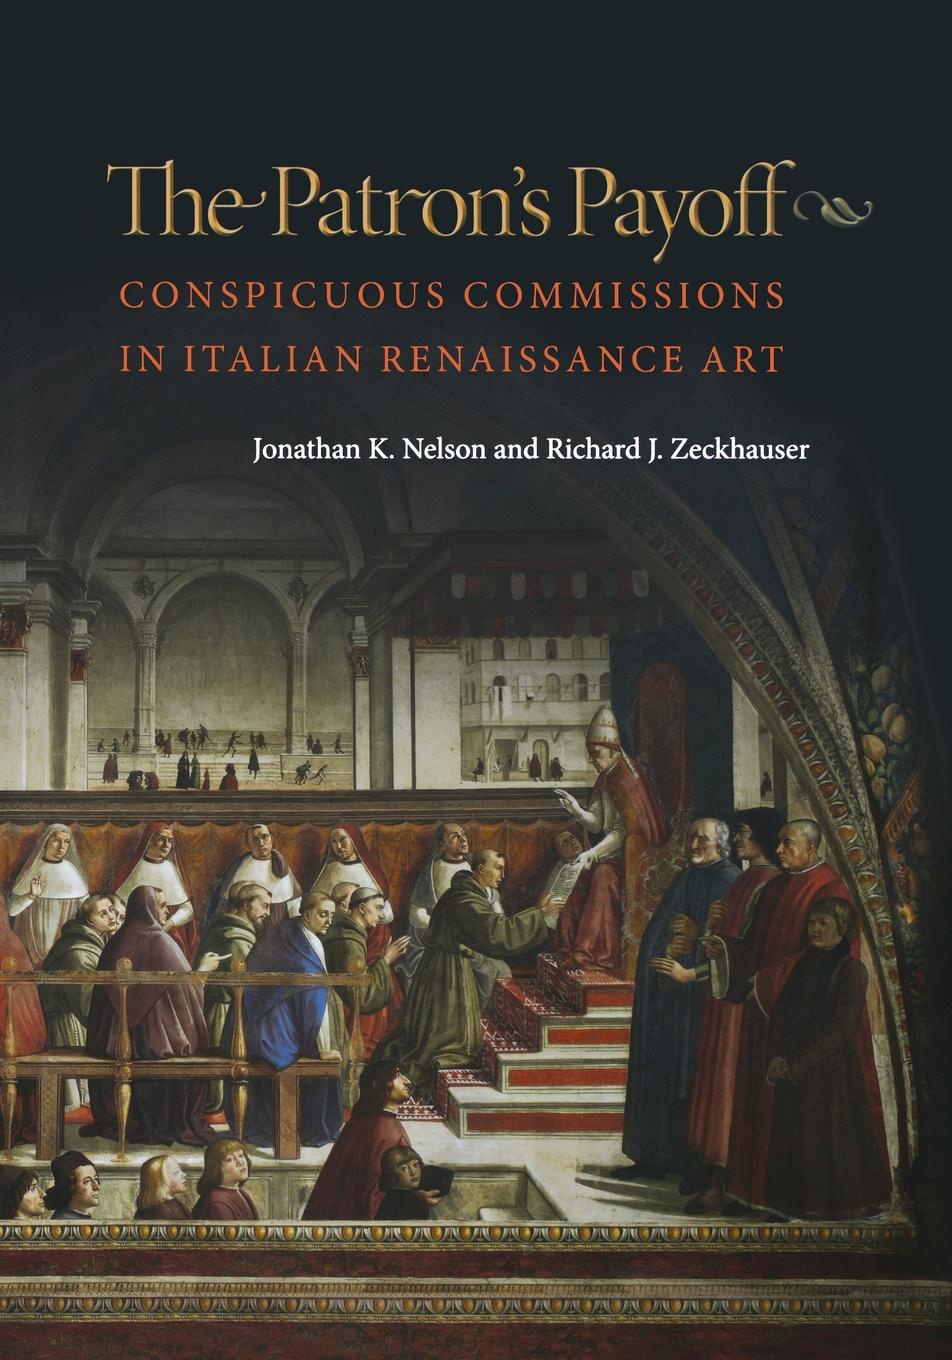 The Patron.s Payoff. Conspicuous Commissions in Italian Renaissance Art